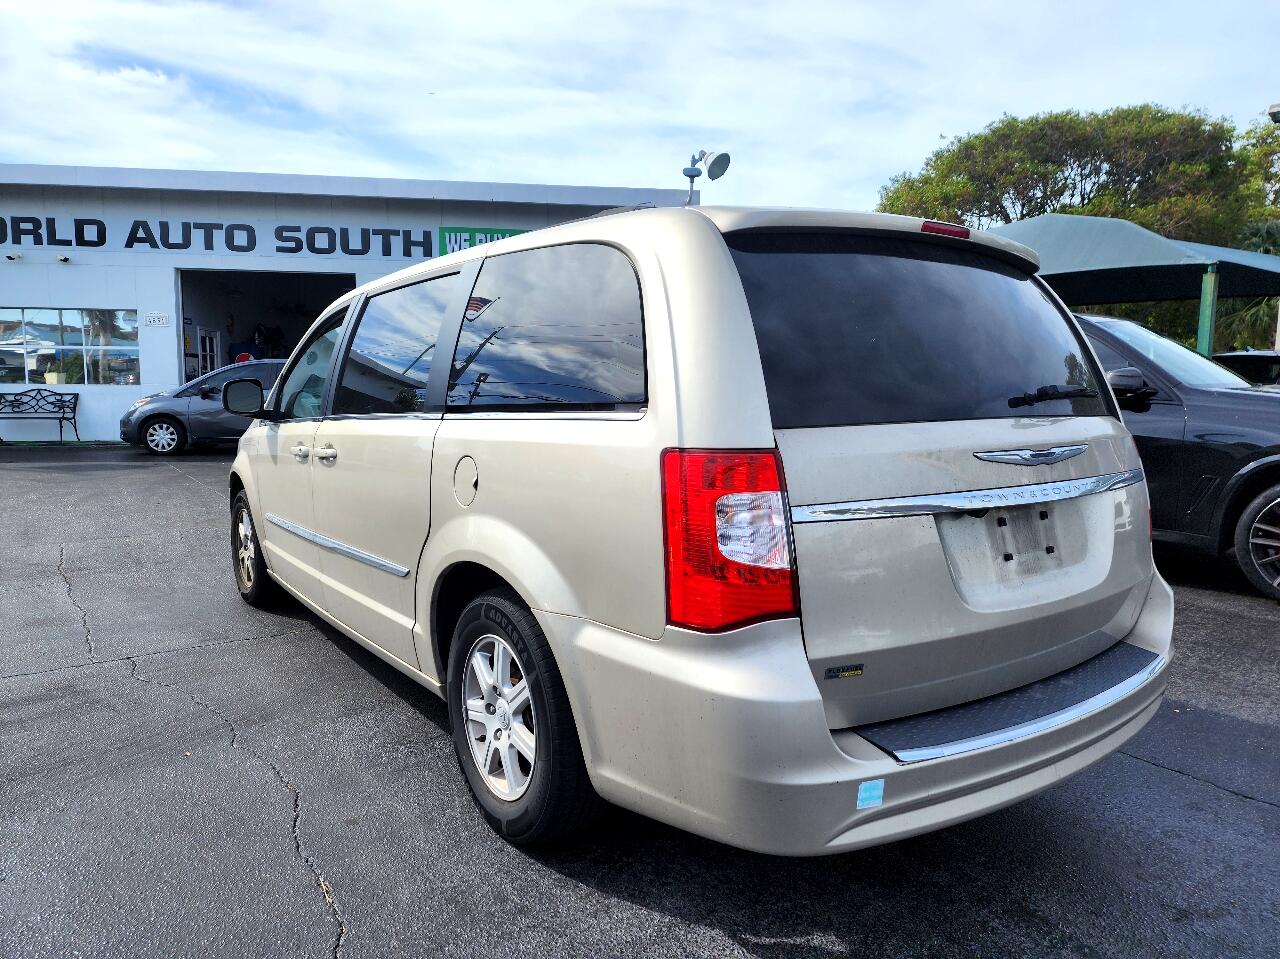 2012 CHRYSLER Town and Country Minivan - $2,500